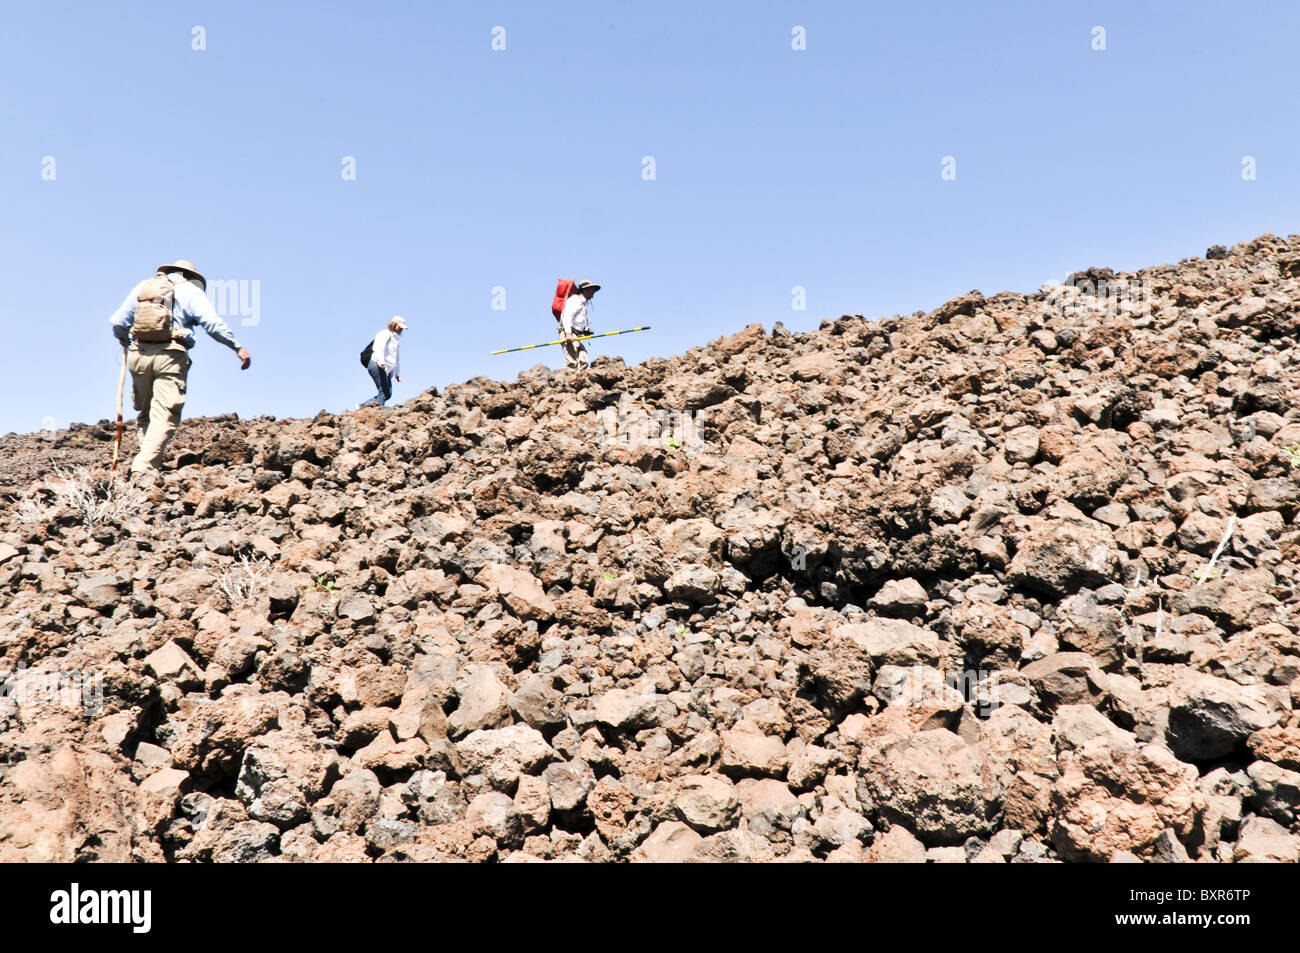 Hikers in field of volcanic bombs, ejected magma which cooled while falling, El Pinacate Biosphere Reserve, Sonora, Mexico Stock Photo